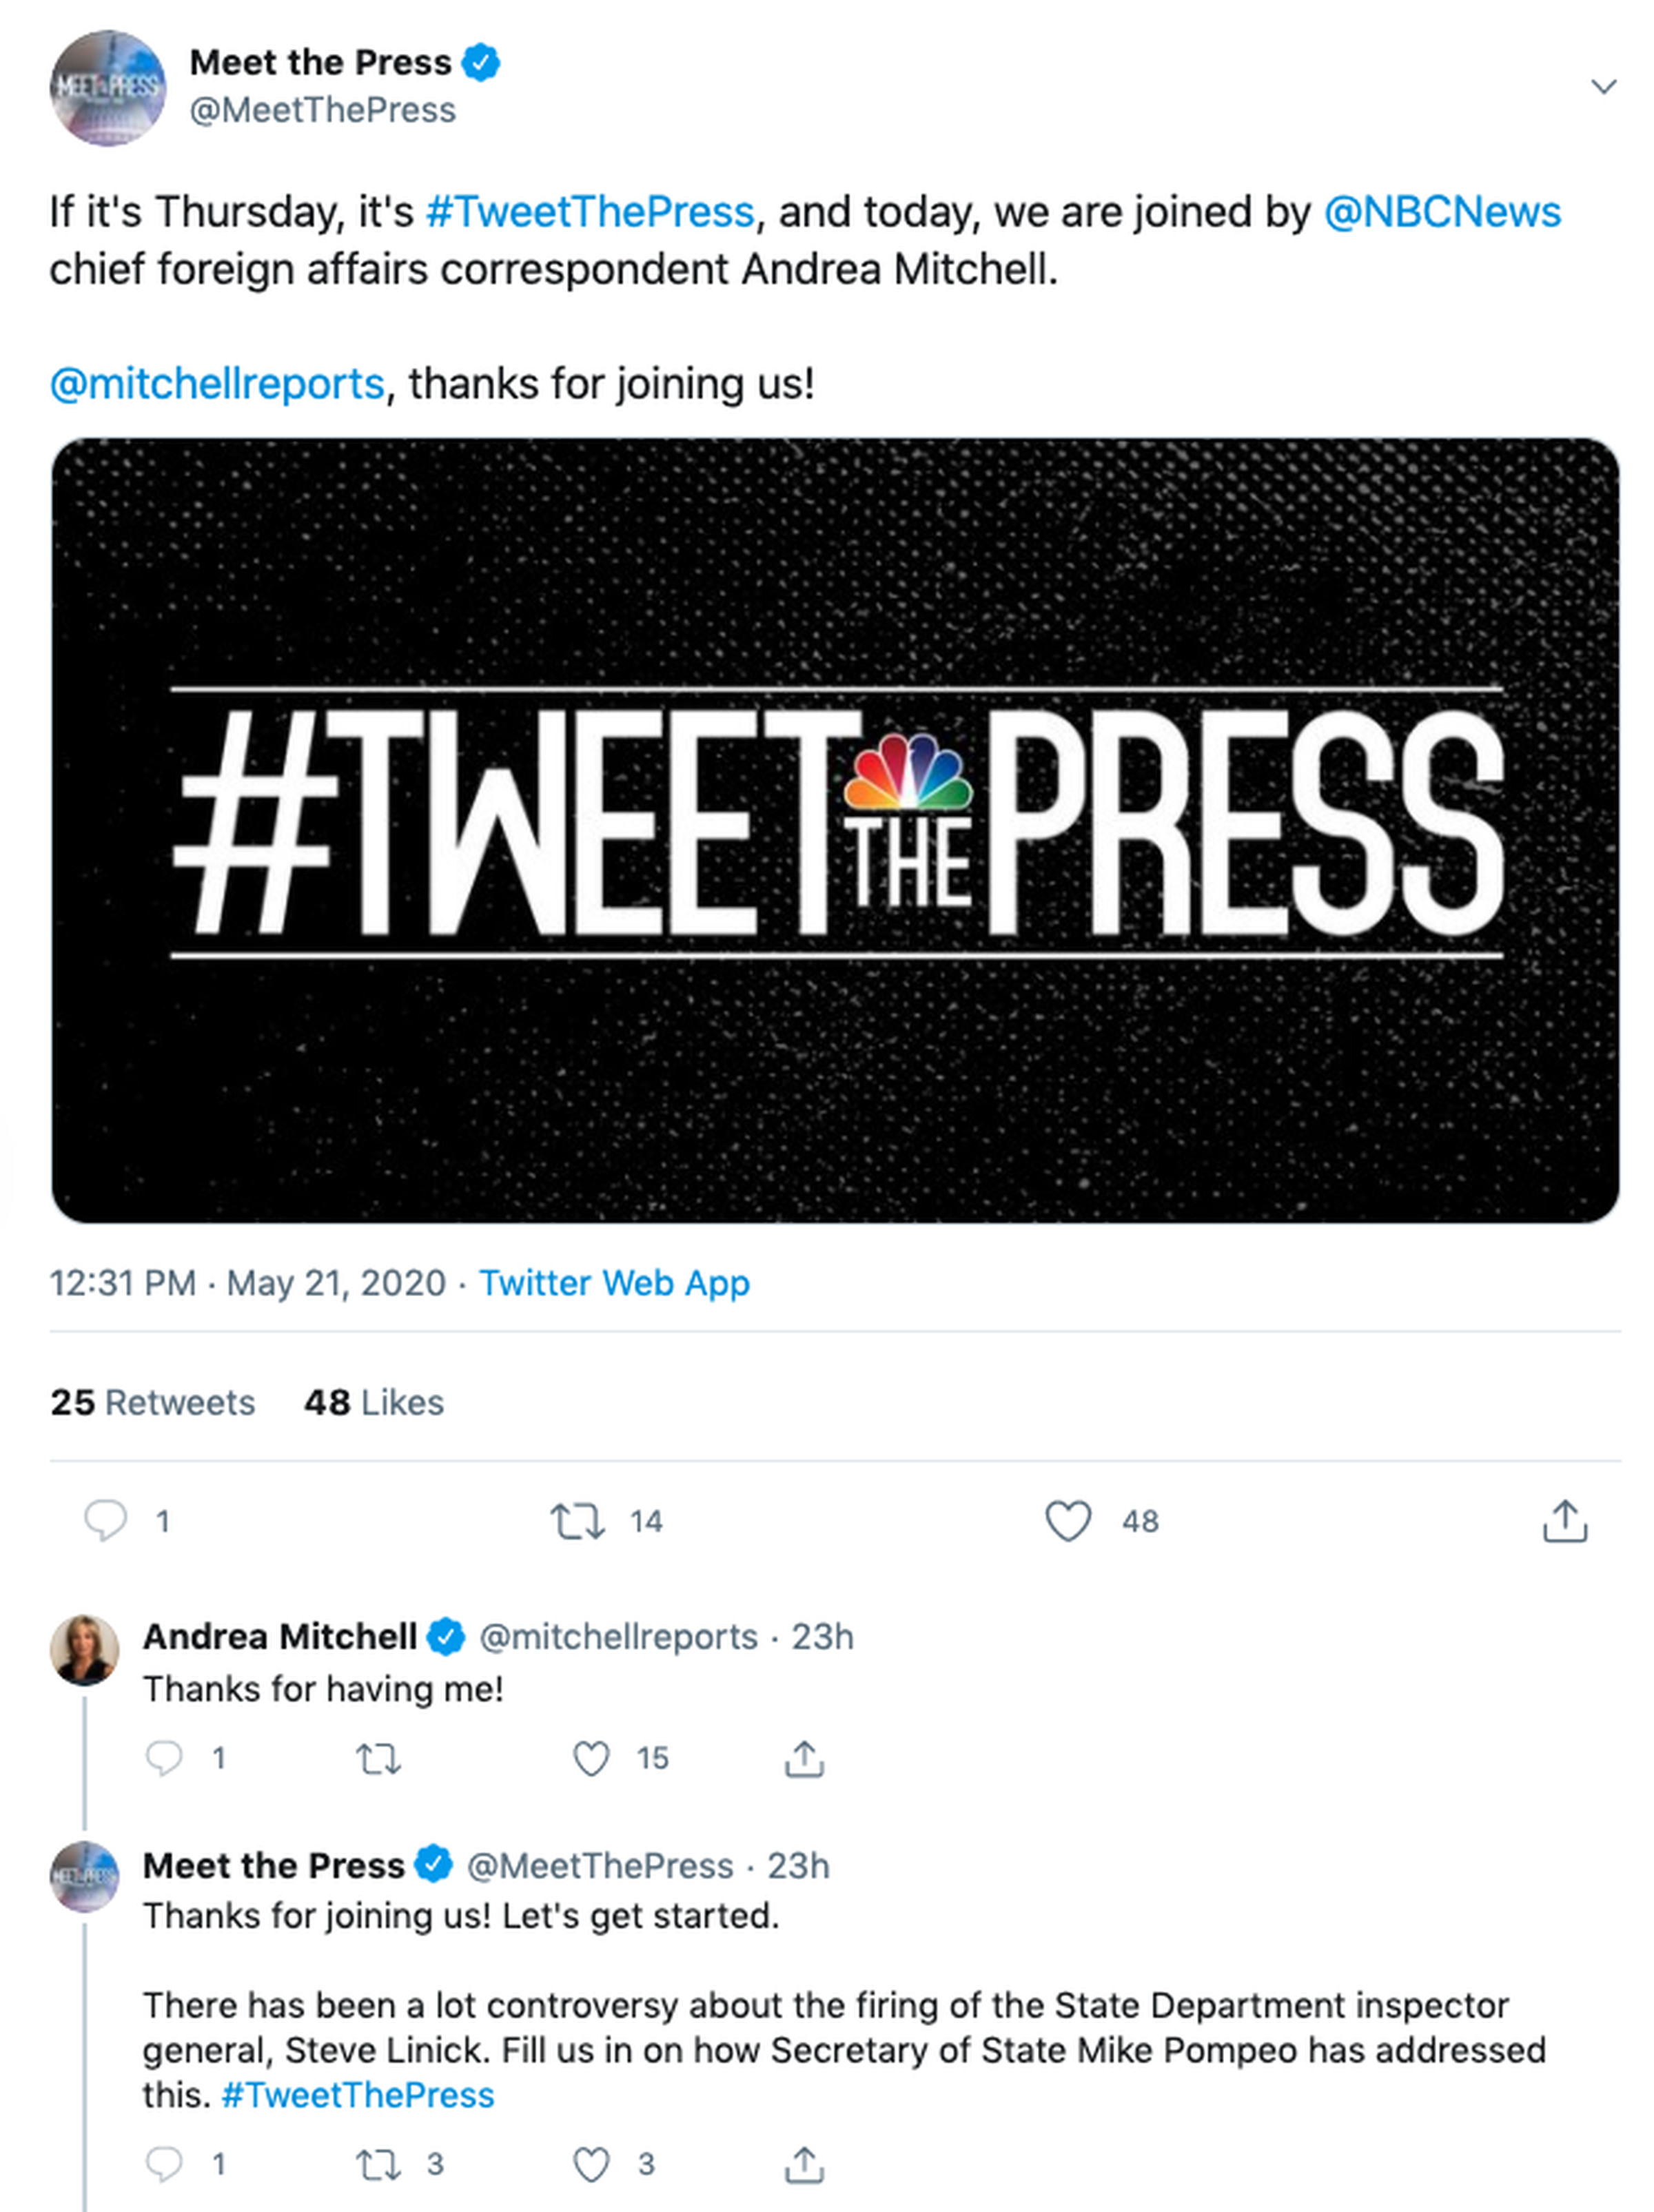 Part of Meet the Press’ Twitter interview with Andrea Mitchell.